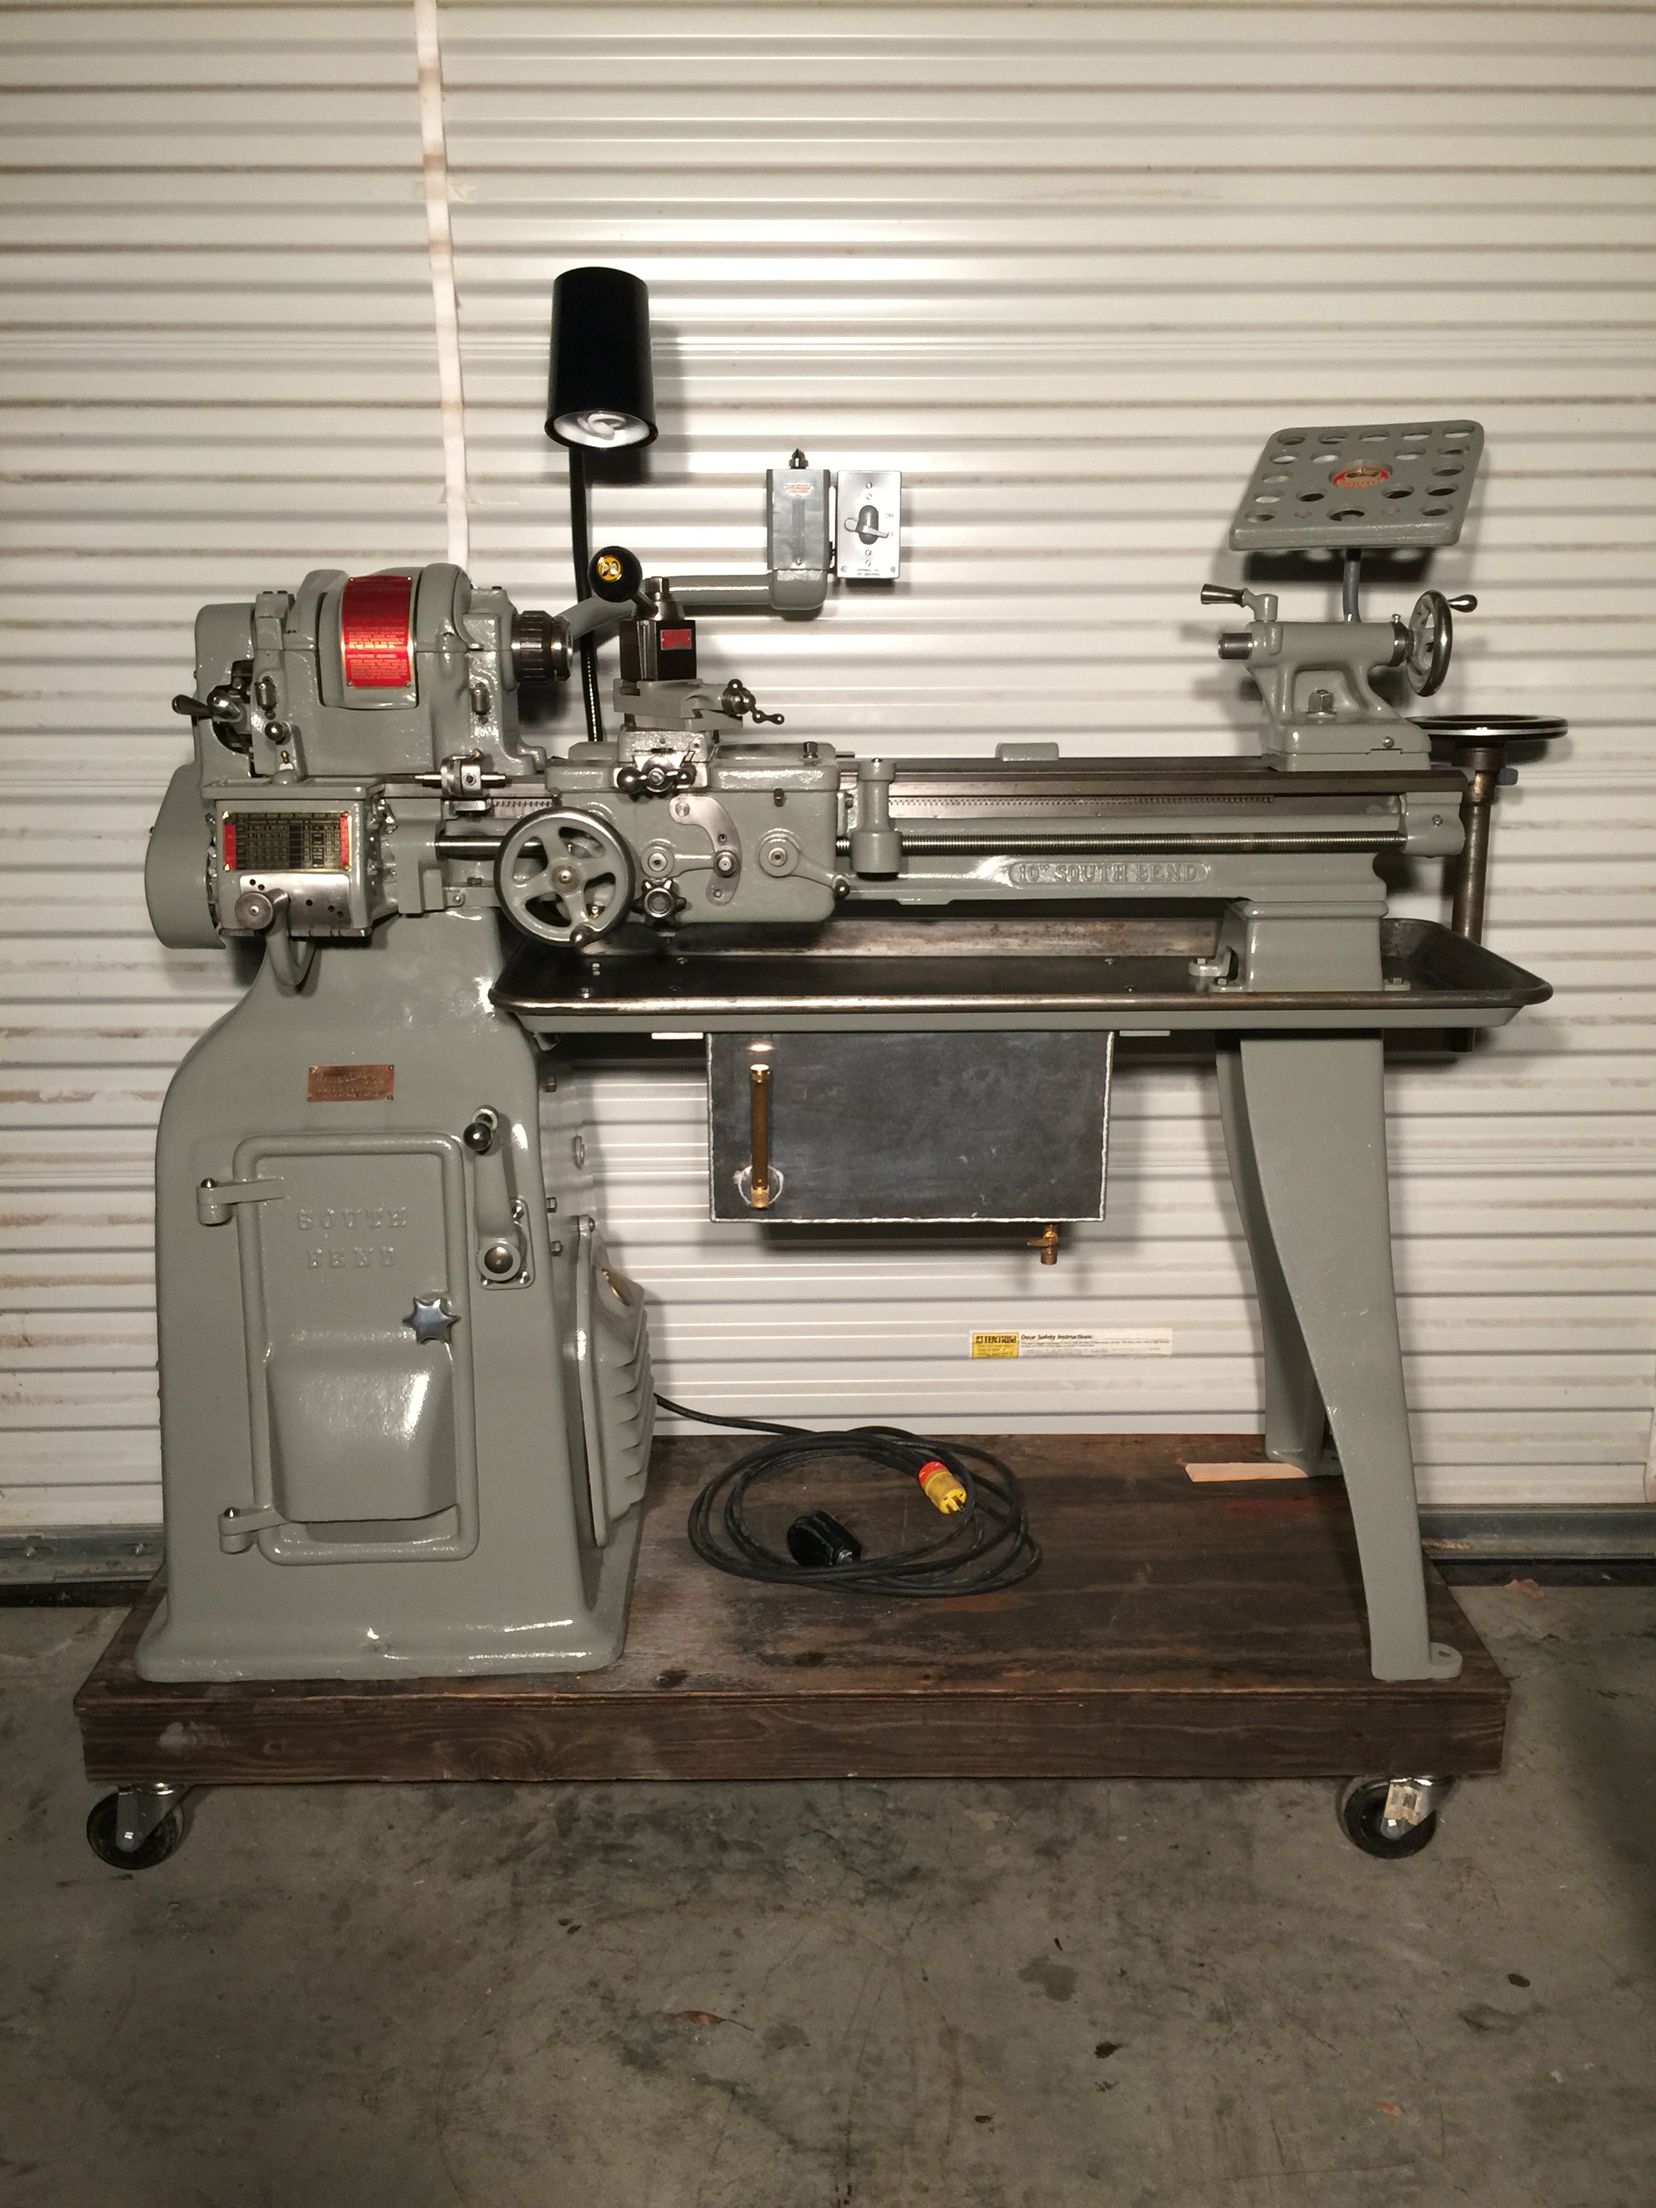 South bend lathe serial number 24690